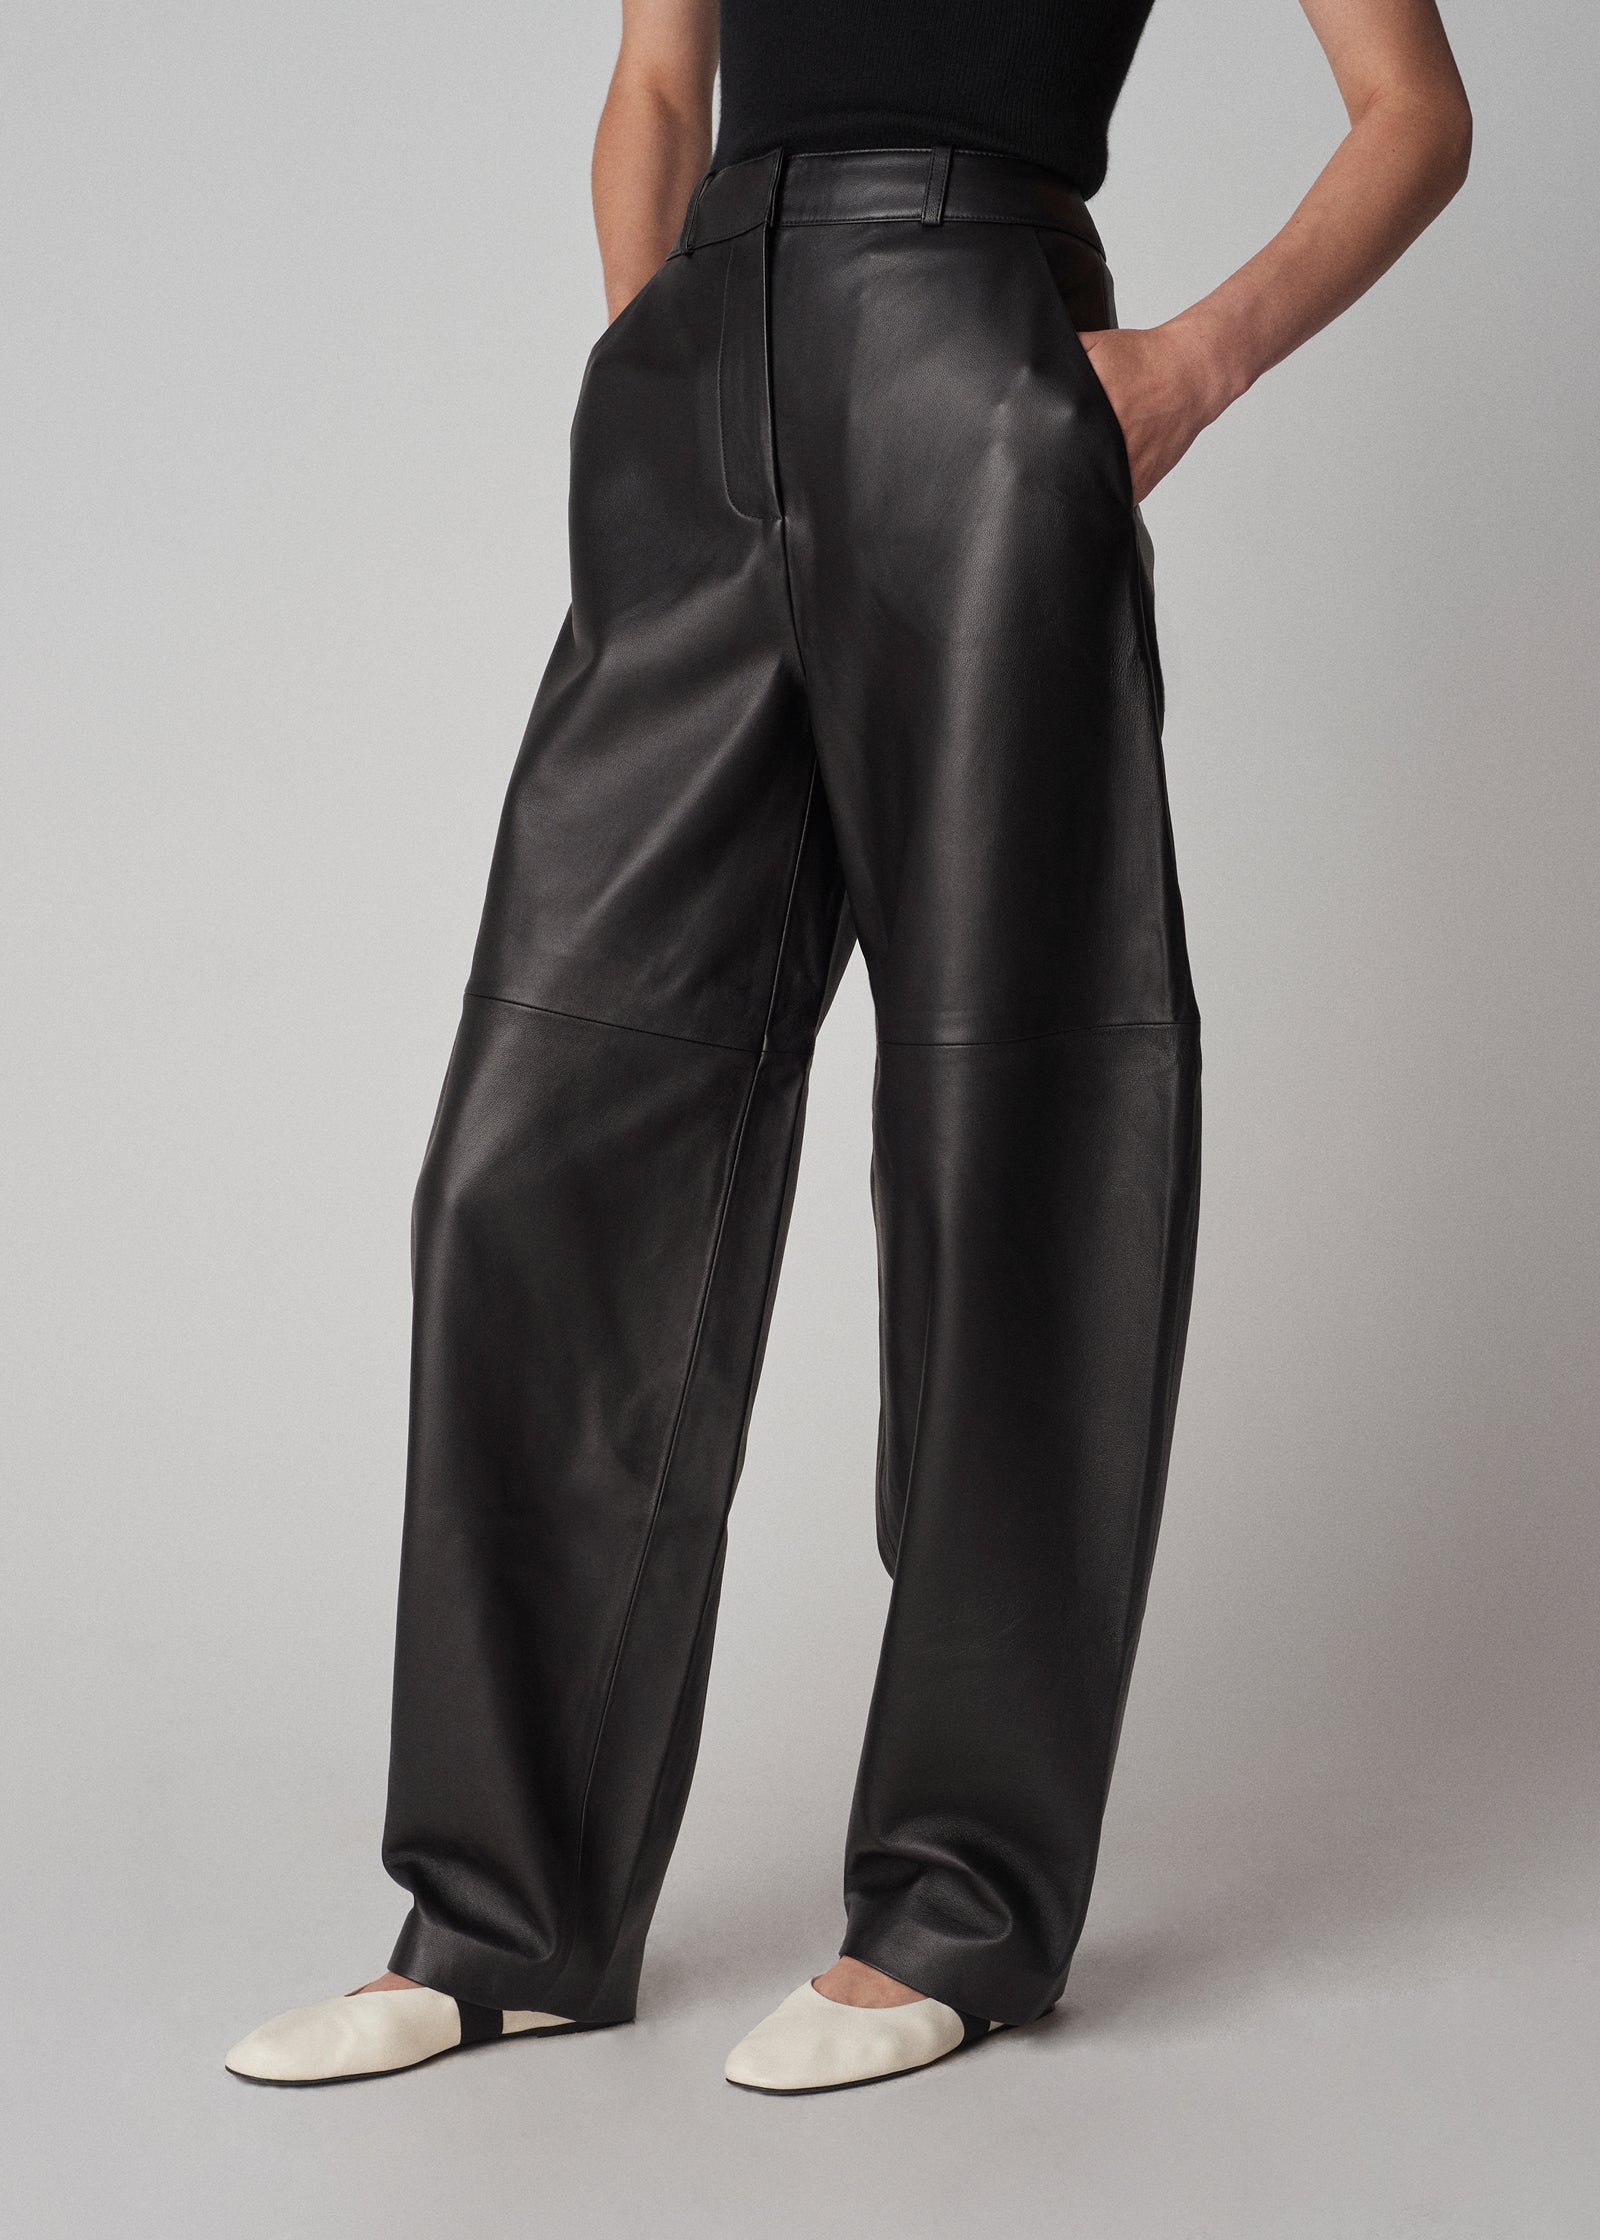 High Waist Curve Seam Pant in Leather - Black - CO Collections